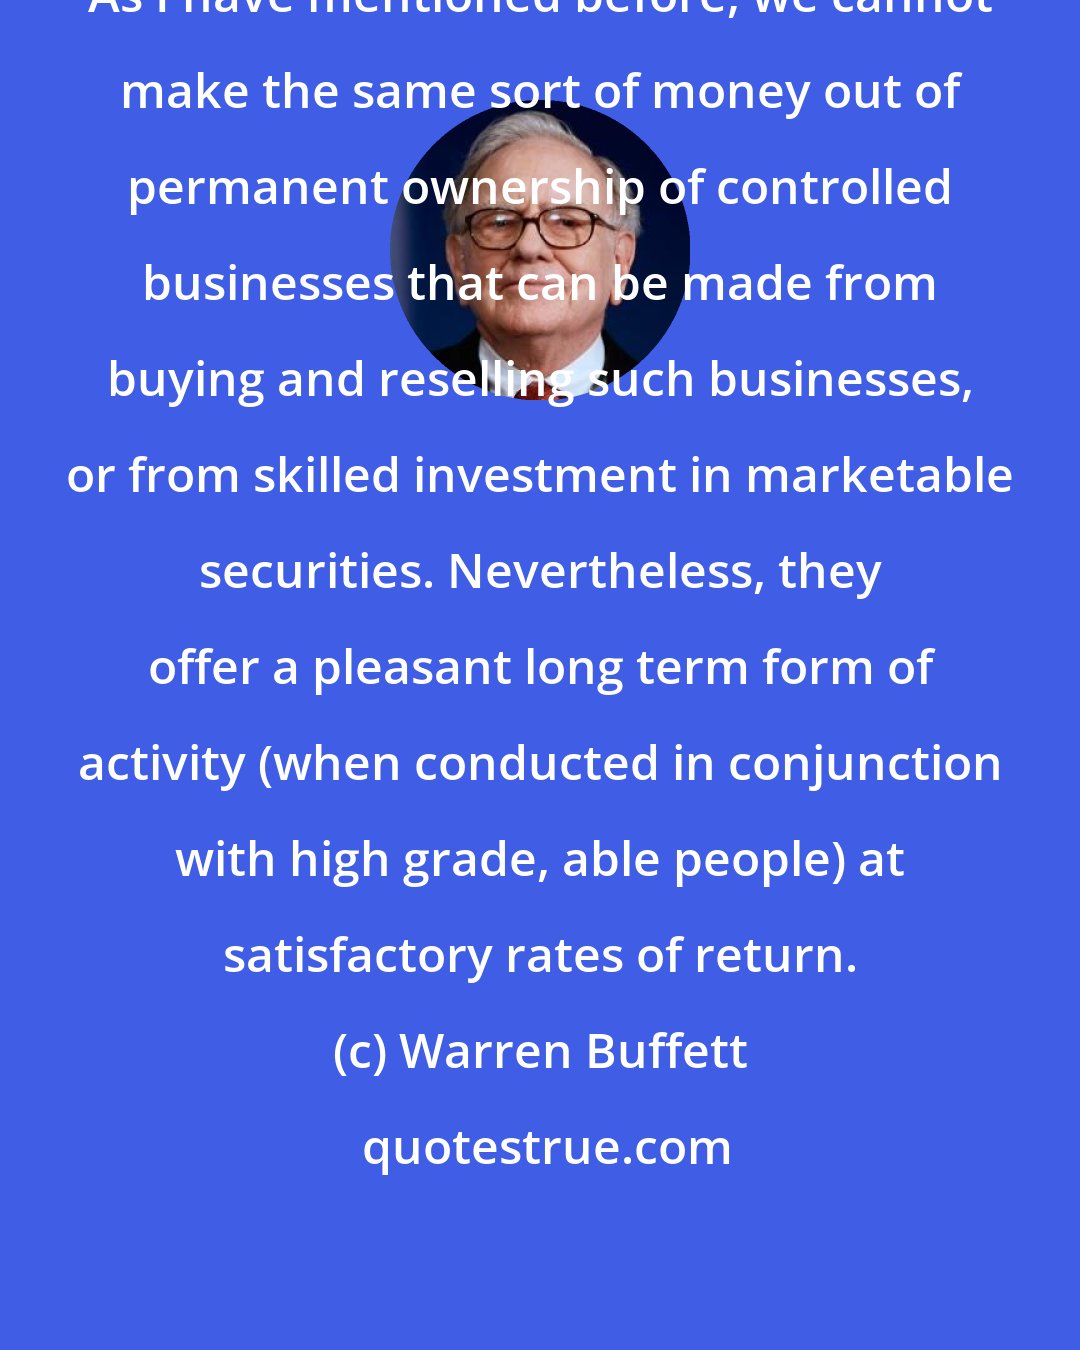 Warren Buffett: As I have mentioned before, we cannot make the same sort of money out of permanent ownership of controlled businesses that can be made from buying and reselling such businesses, or from skilled investment in marketable securities. Nevertheless, they offer a pleasant long term form of activity (when conducted in conjunction with high grade, able people) at satisfactory rates of return.